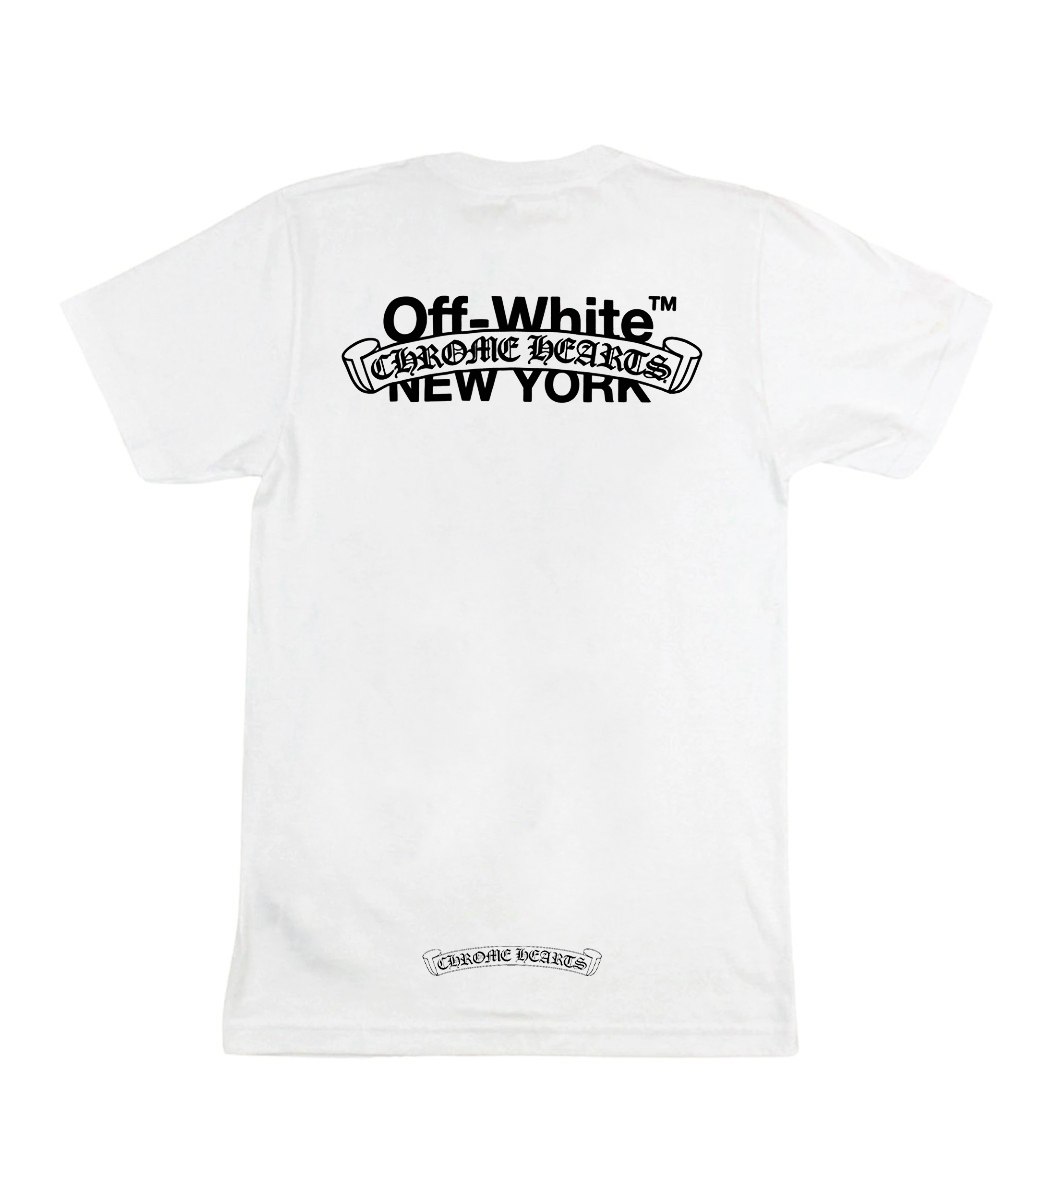 Off-White presents its new logo in a t-shirt - HIGHXTAR.